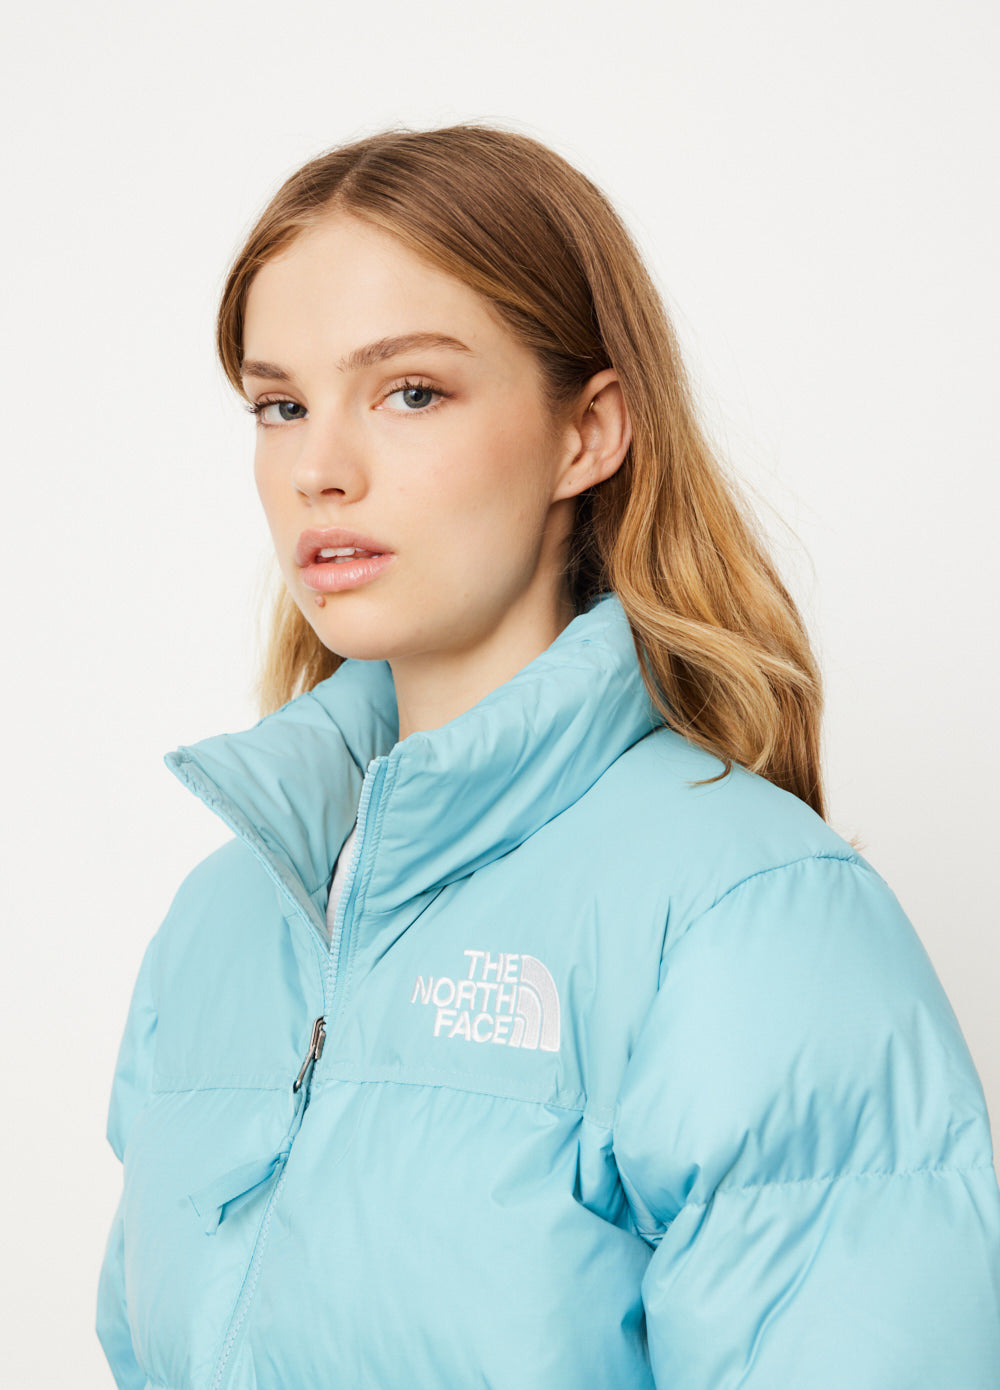 The North Face® 1996 Retro Nuptse Puffer Jacket Women - Bloomingdale's